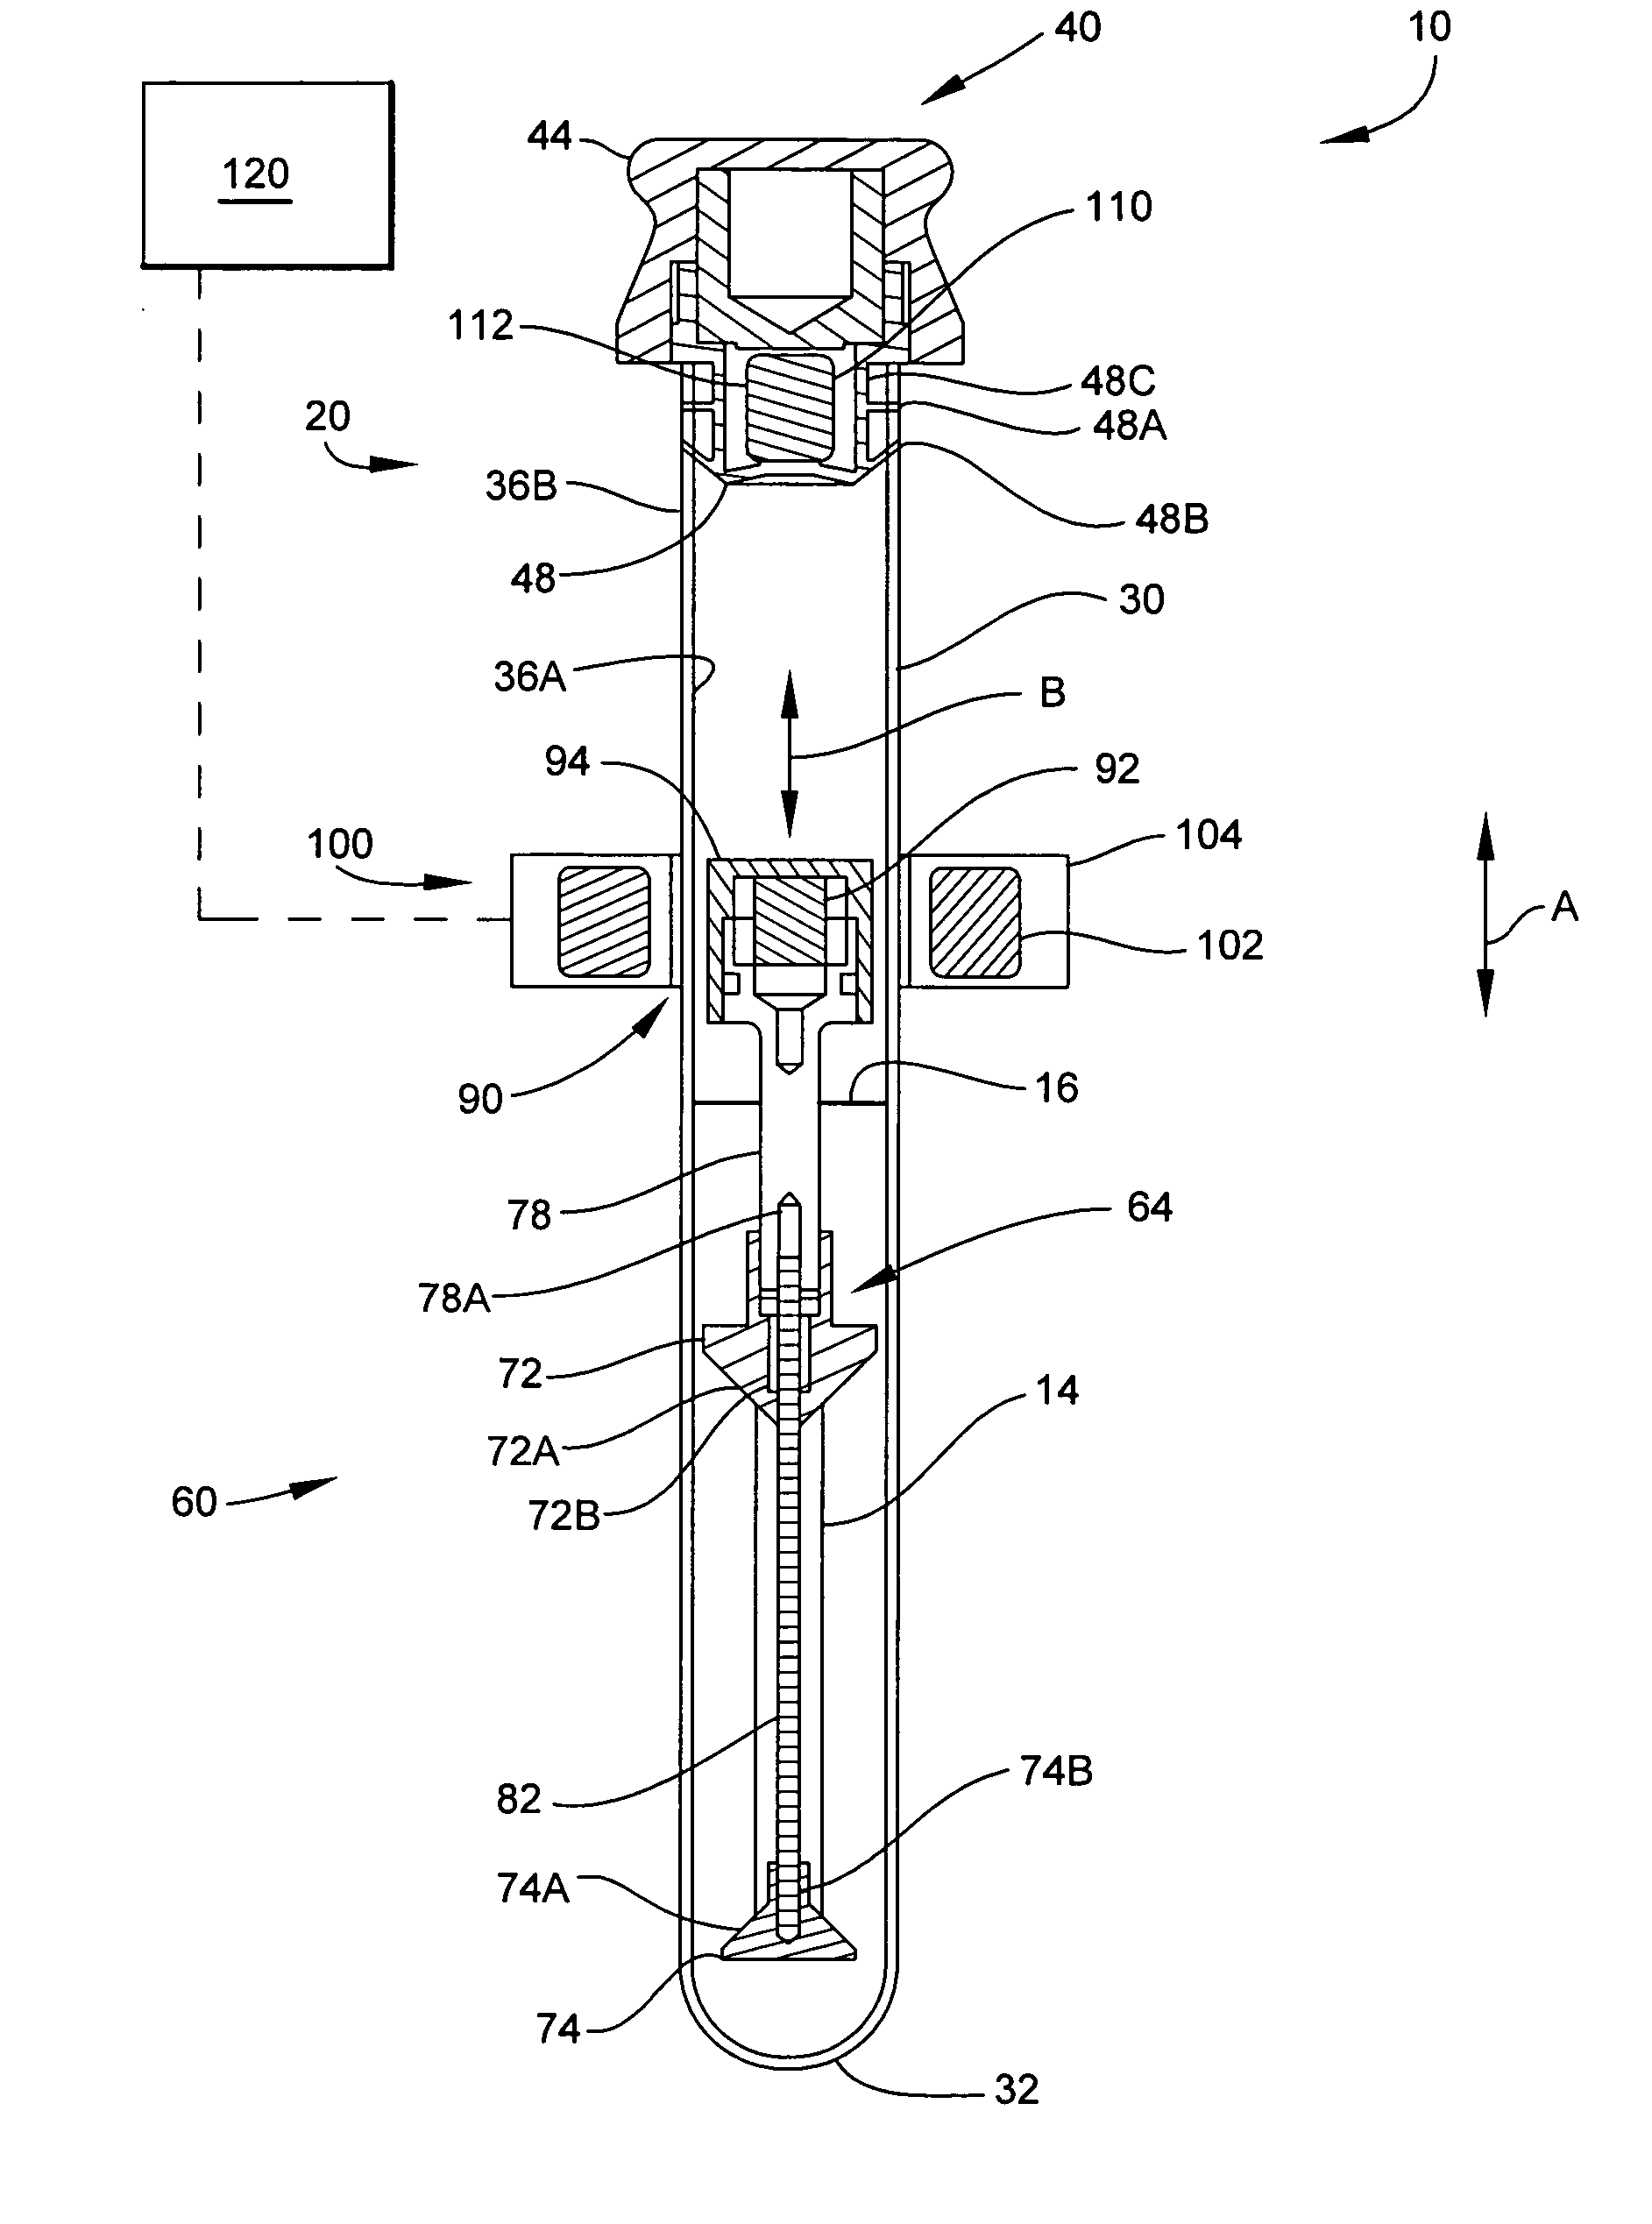 Apparatus and method for agitating a sample during in vitro testing